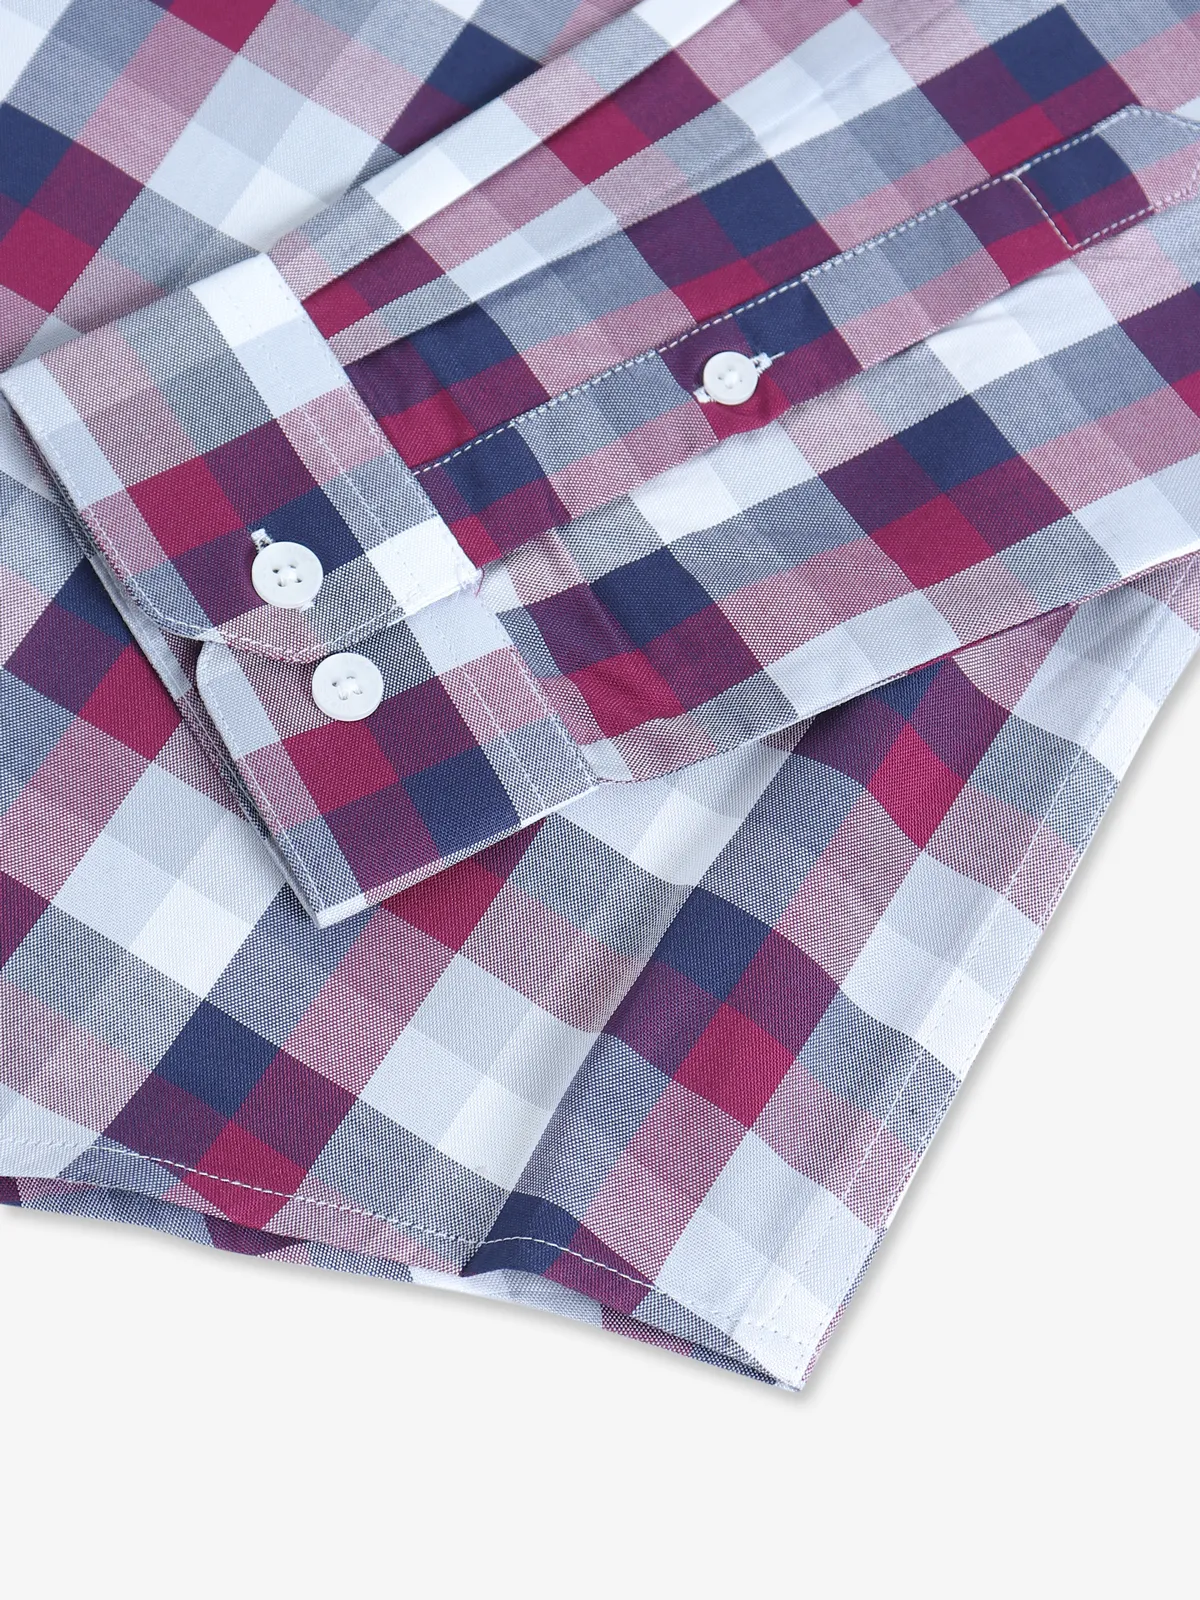 Allen Solly pink and blue checks shirt